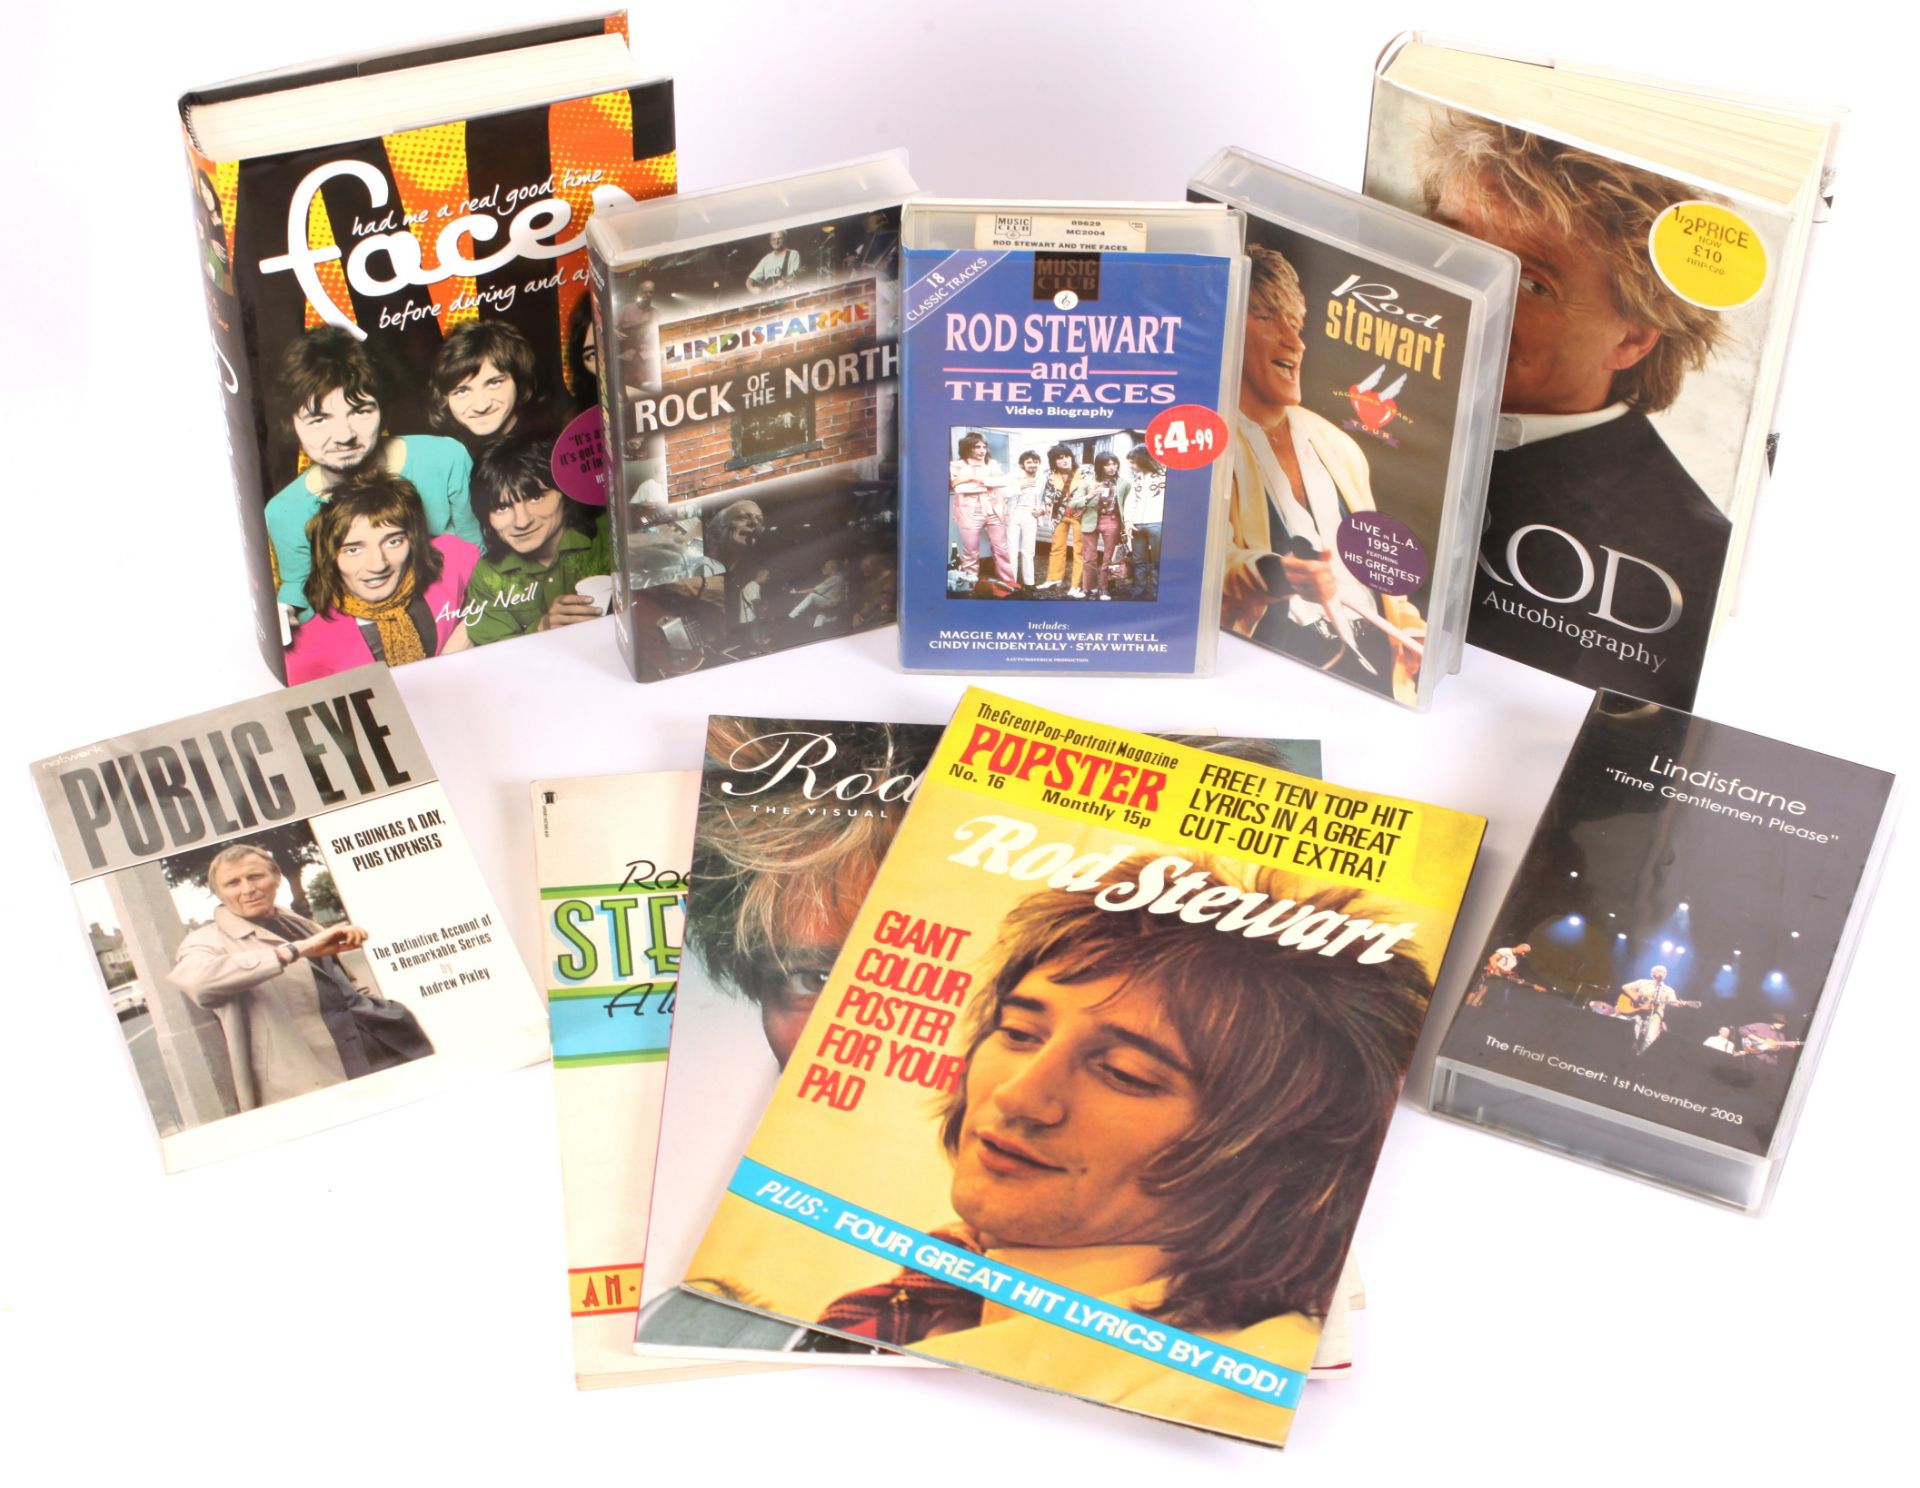 Rod Stewart/Faces and Other Books and Videos